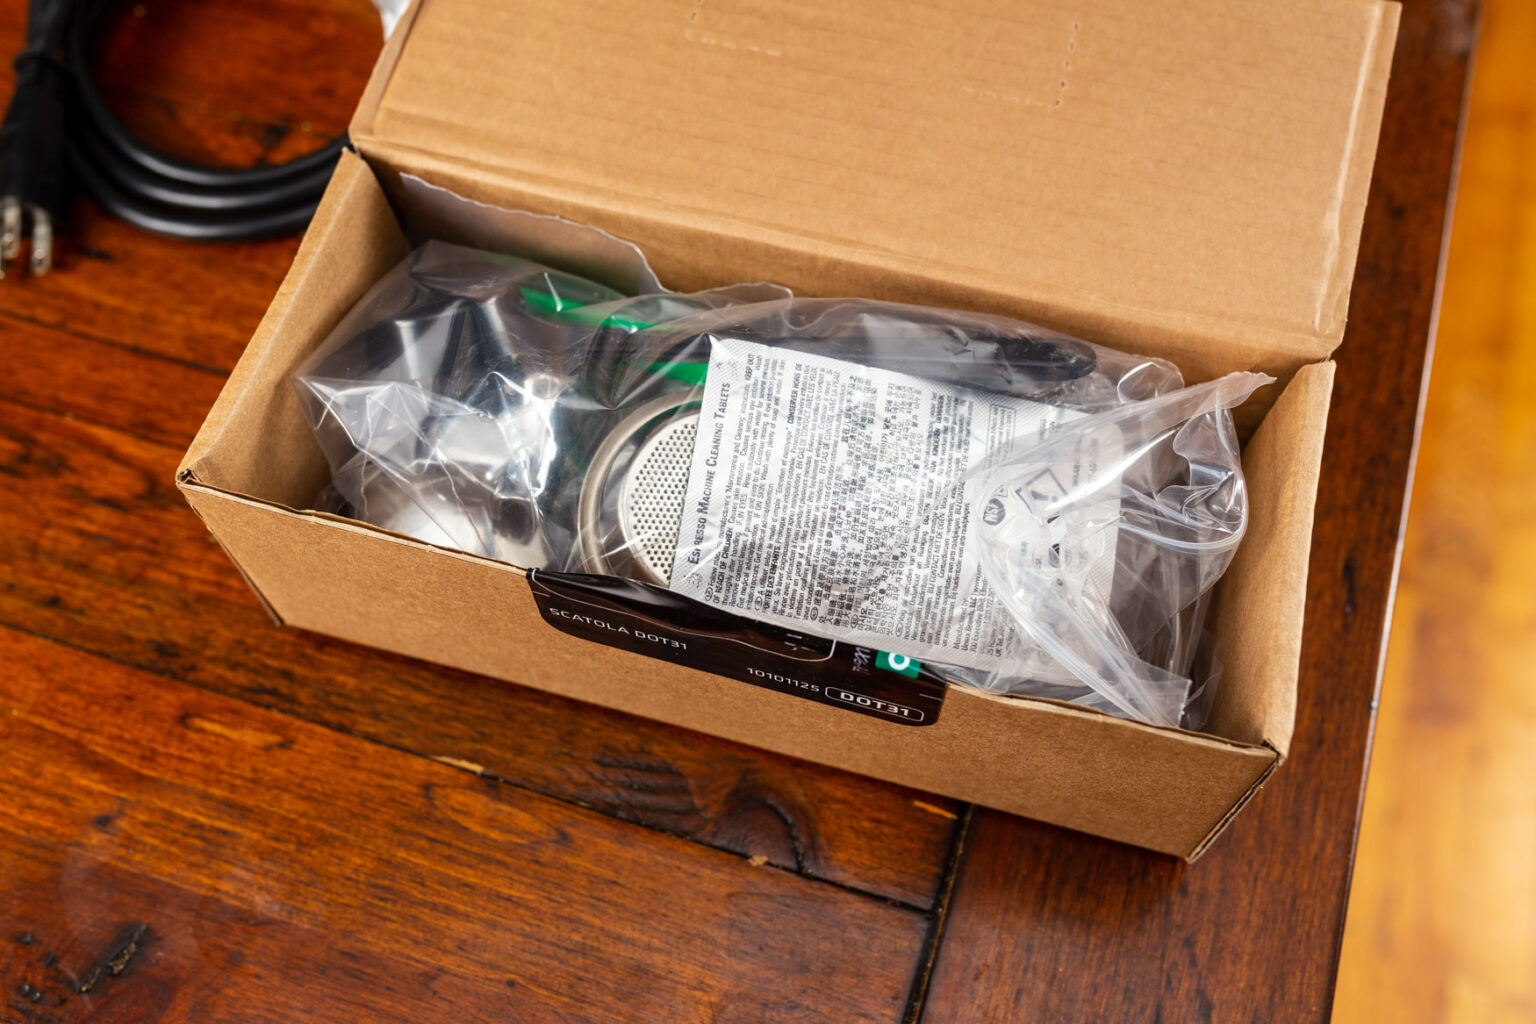 The box containing all the extras that Rancilio includes with the machine, as well as the basics.